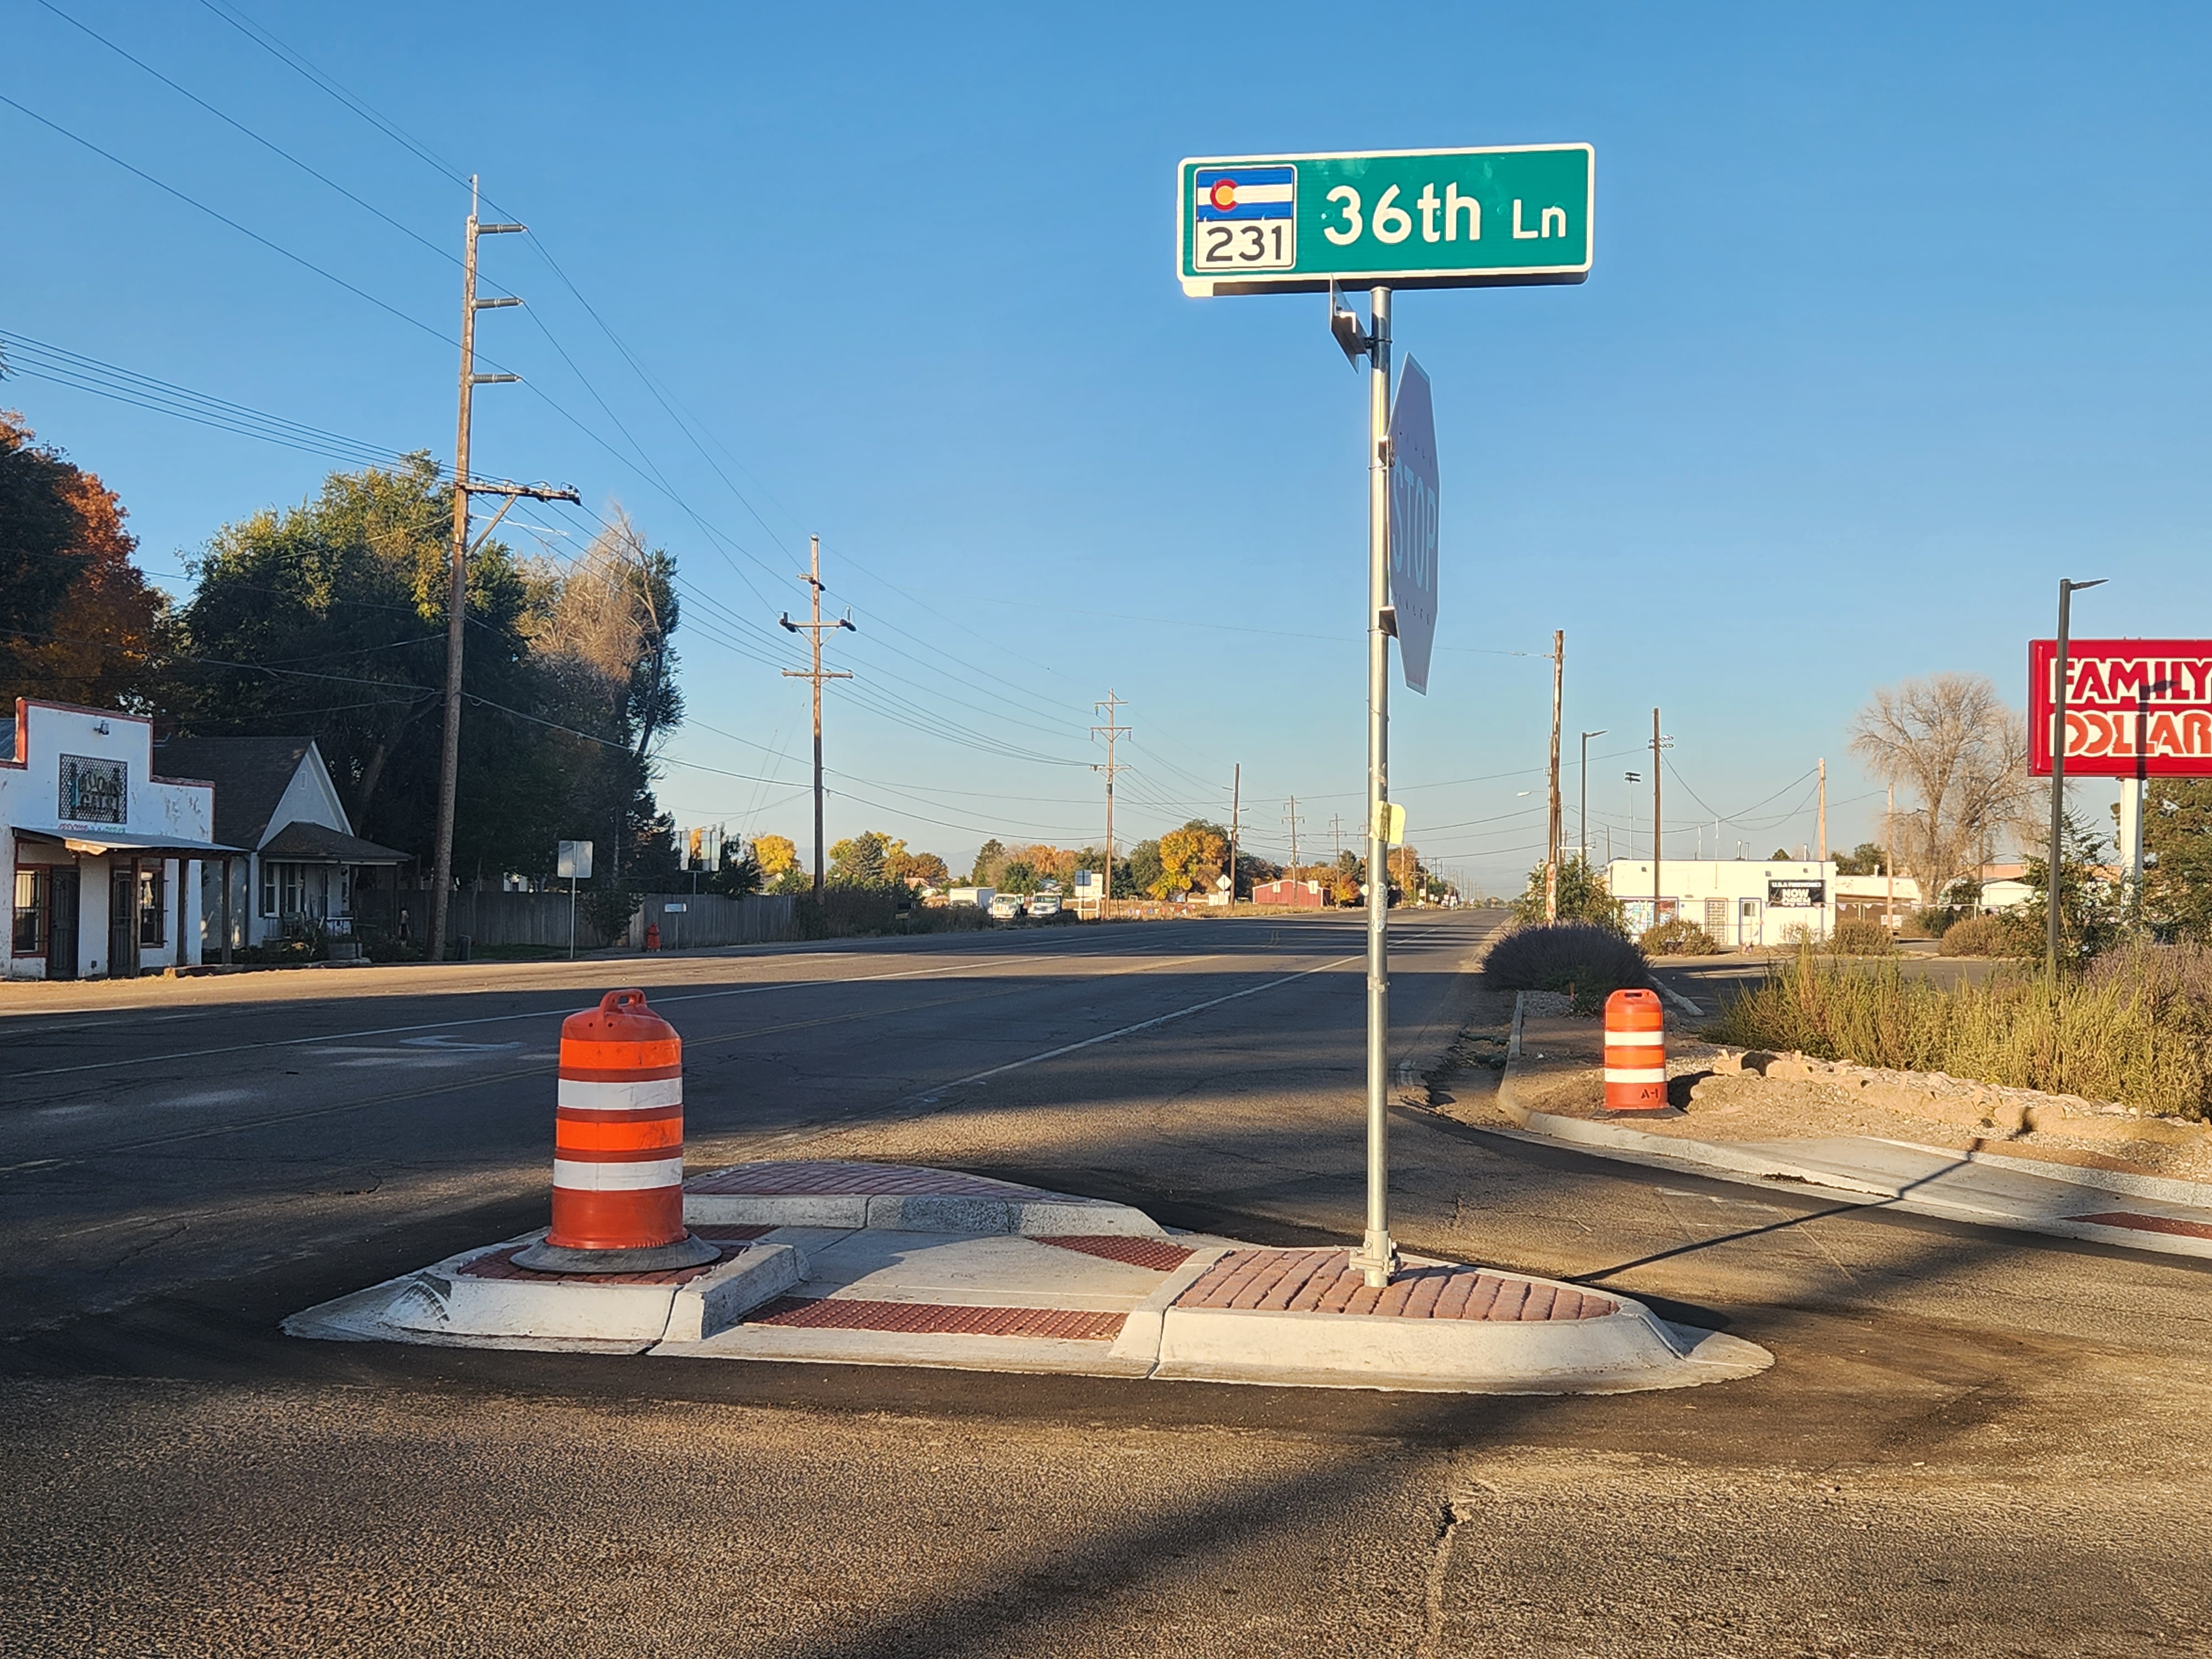 US 50C and CO 231_Raised Islands Installed with Pedestrian Refuge.jpg detail image